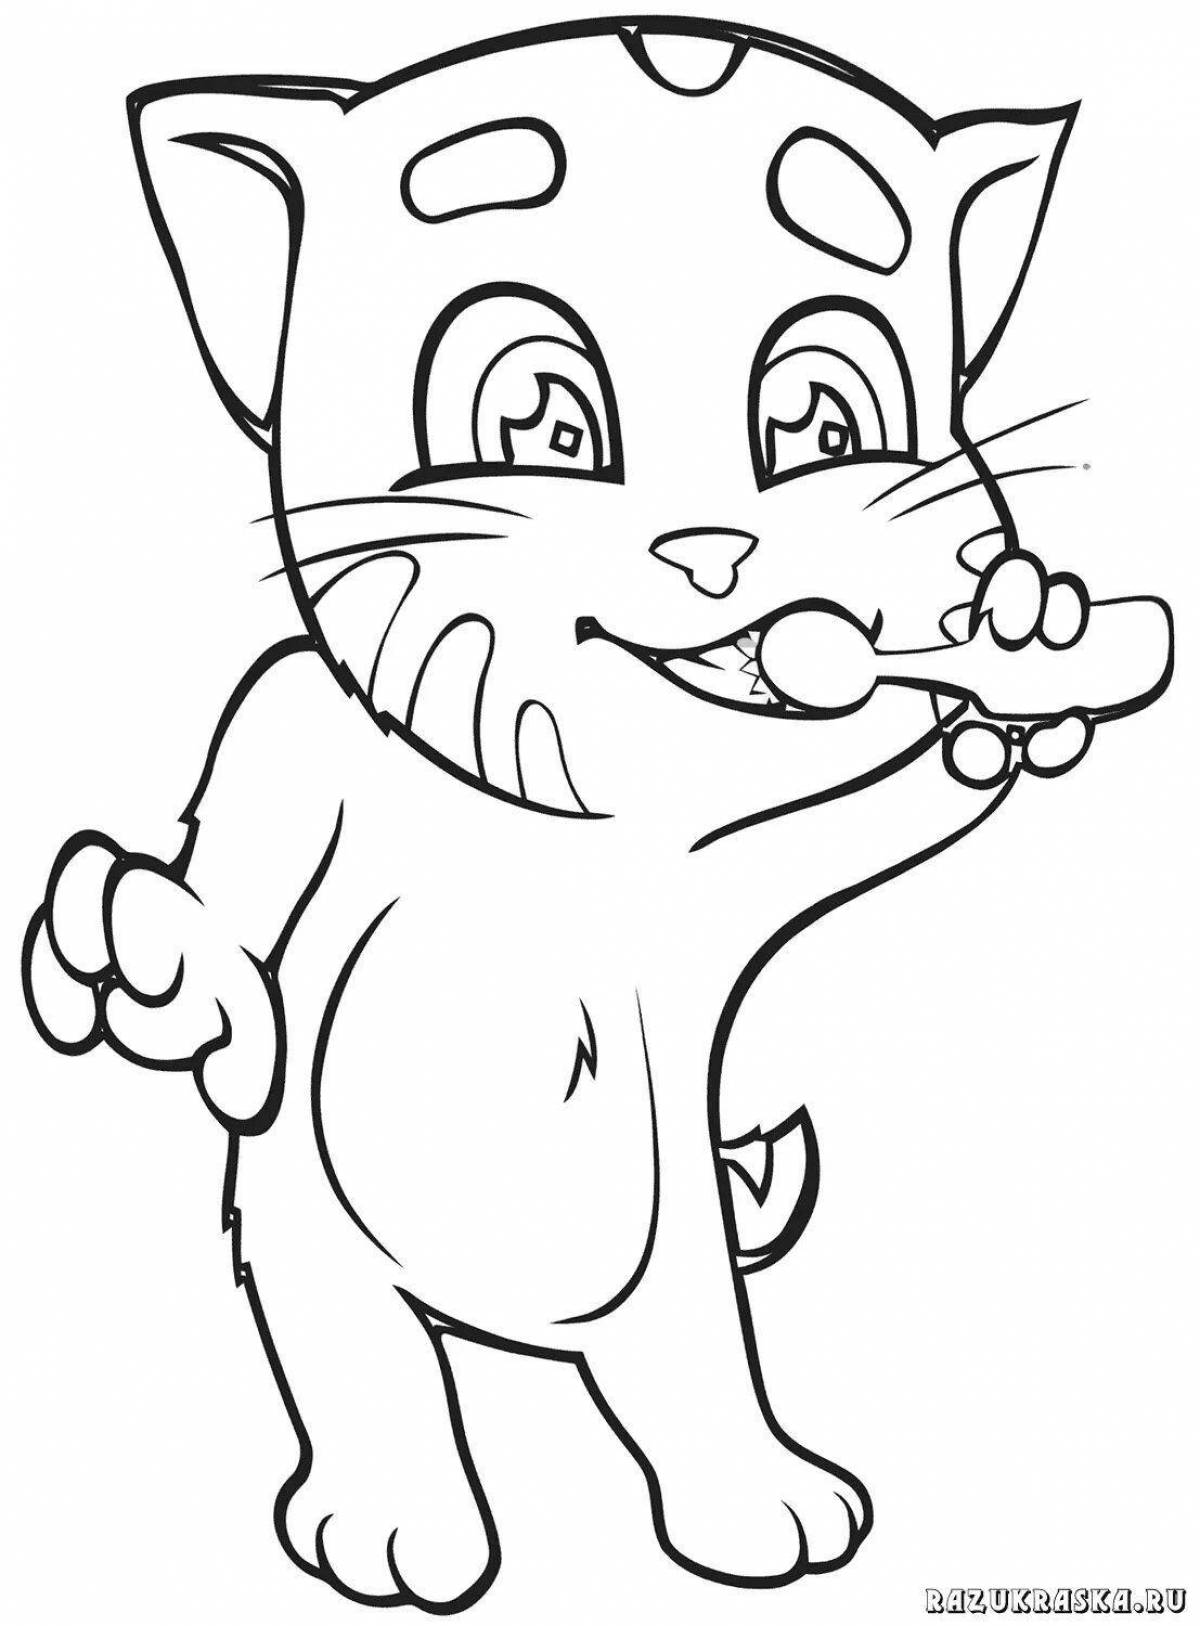 Coloring book witty cat booboo